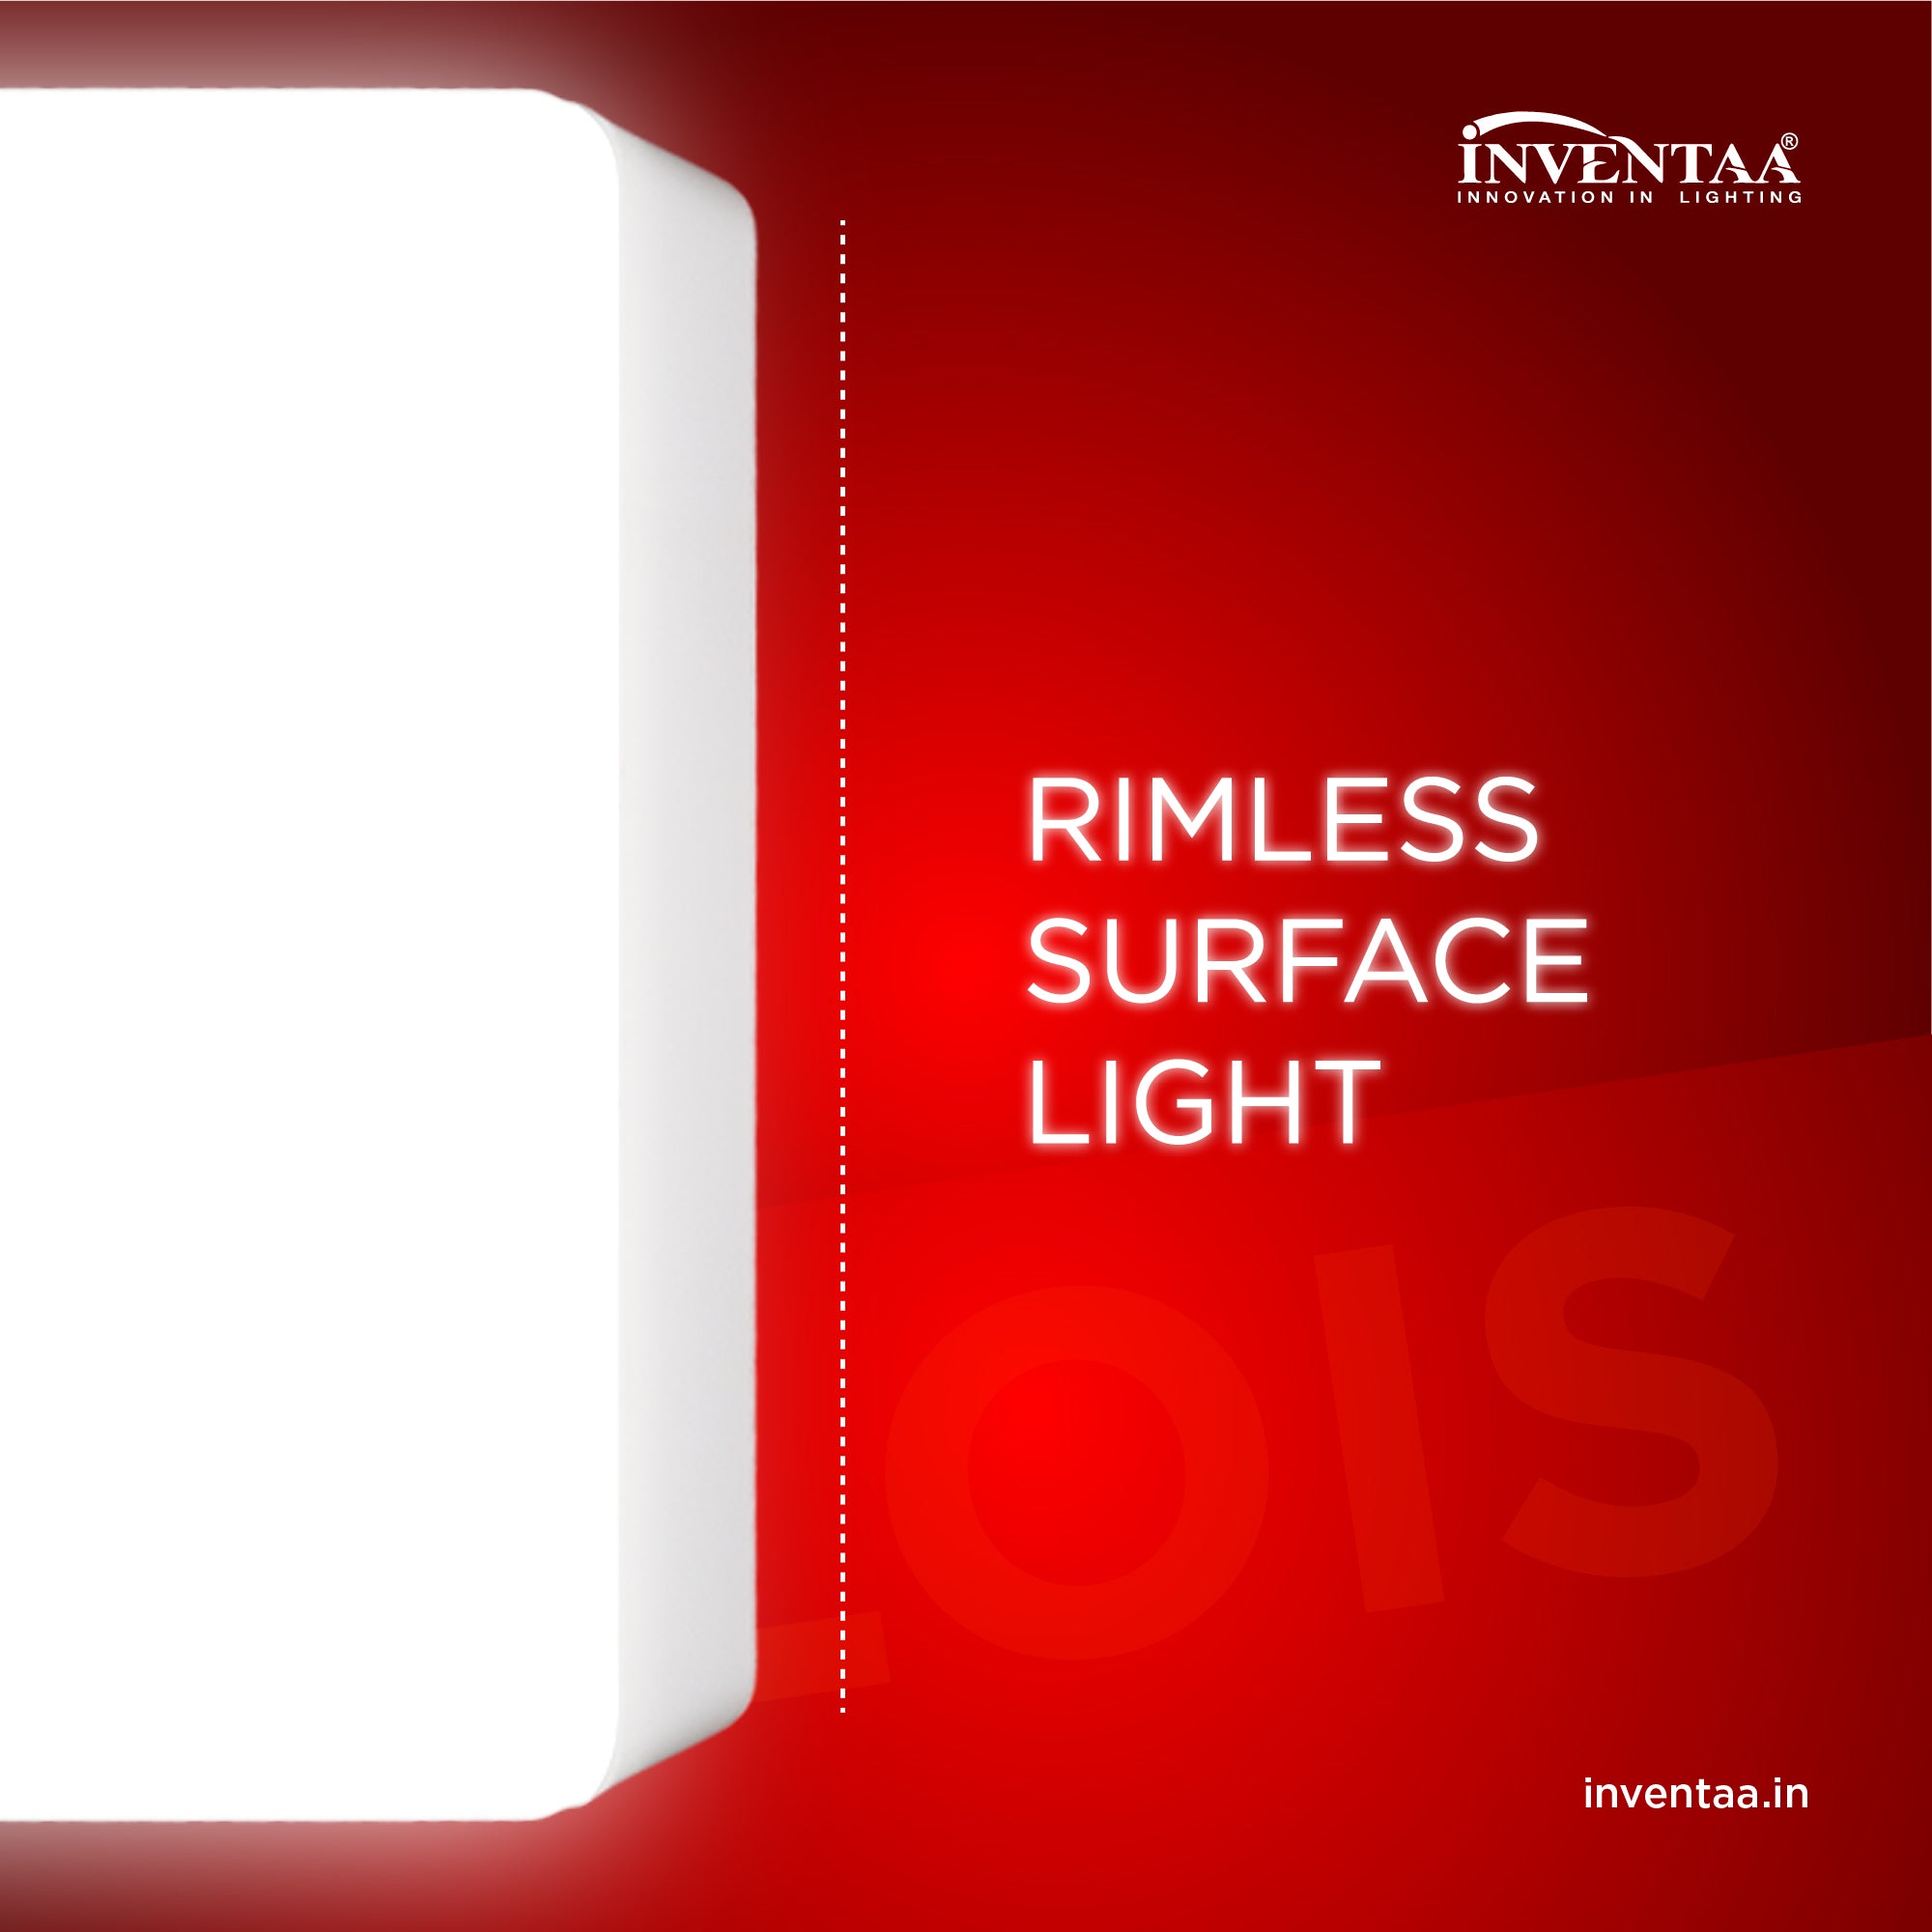  Lois Square 8W LED Surface Light Featuring Its Rimless Design  #watts_15w